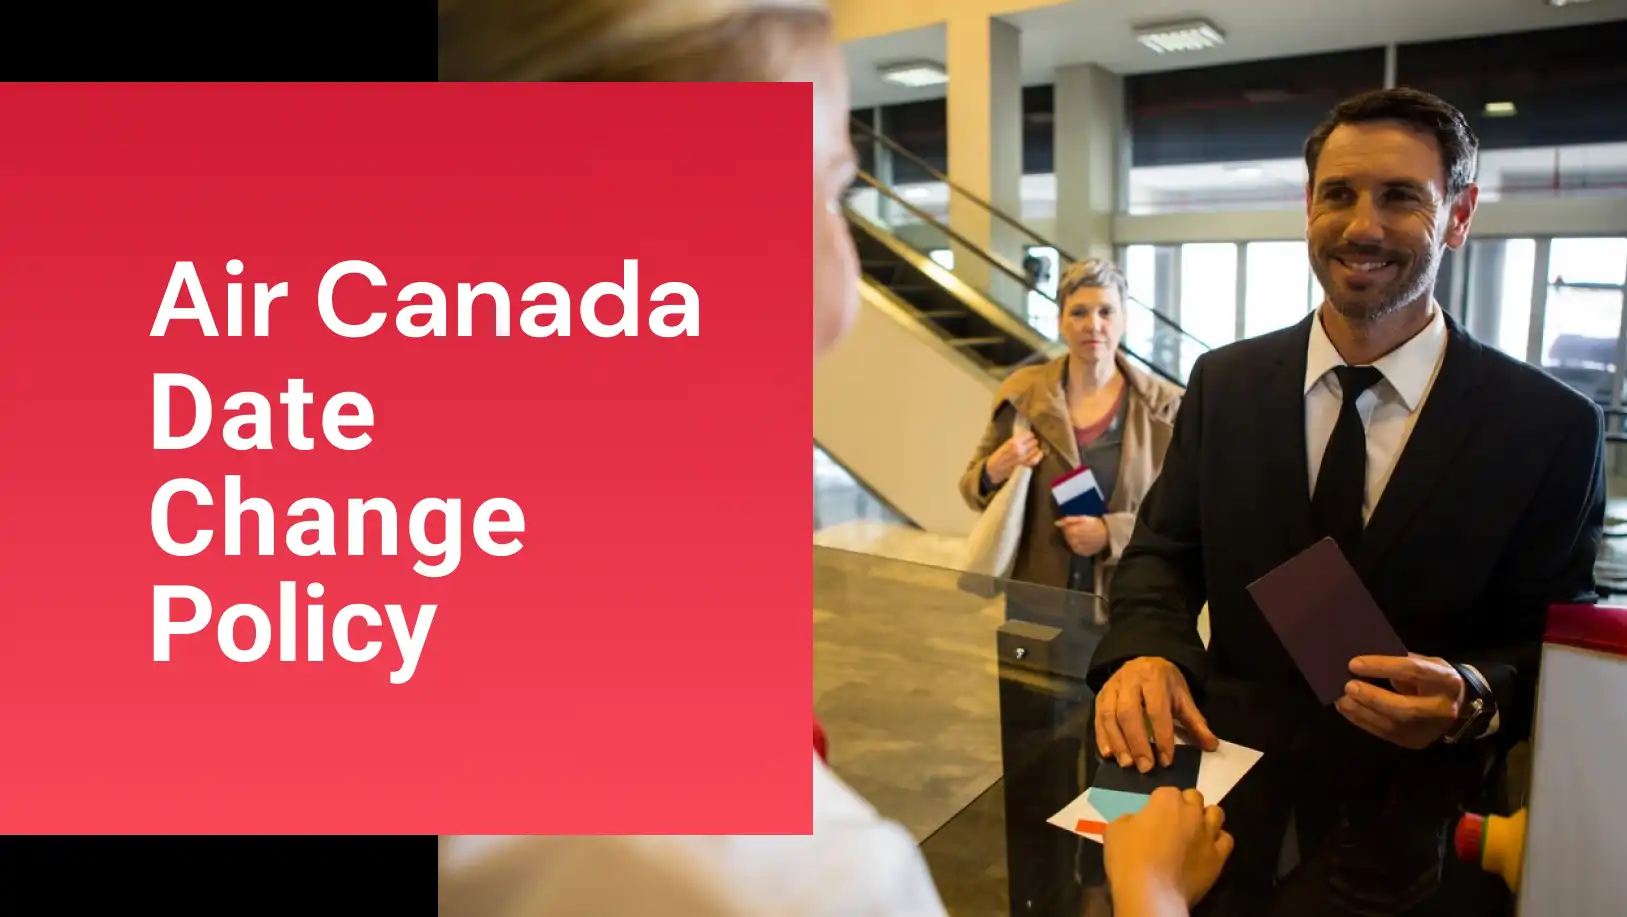 Air Canada Date Change Policy